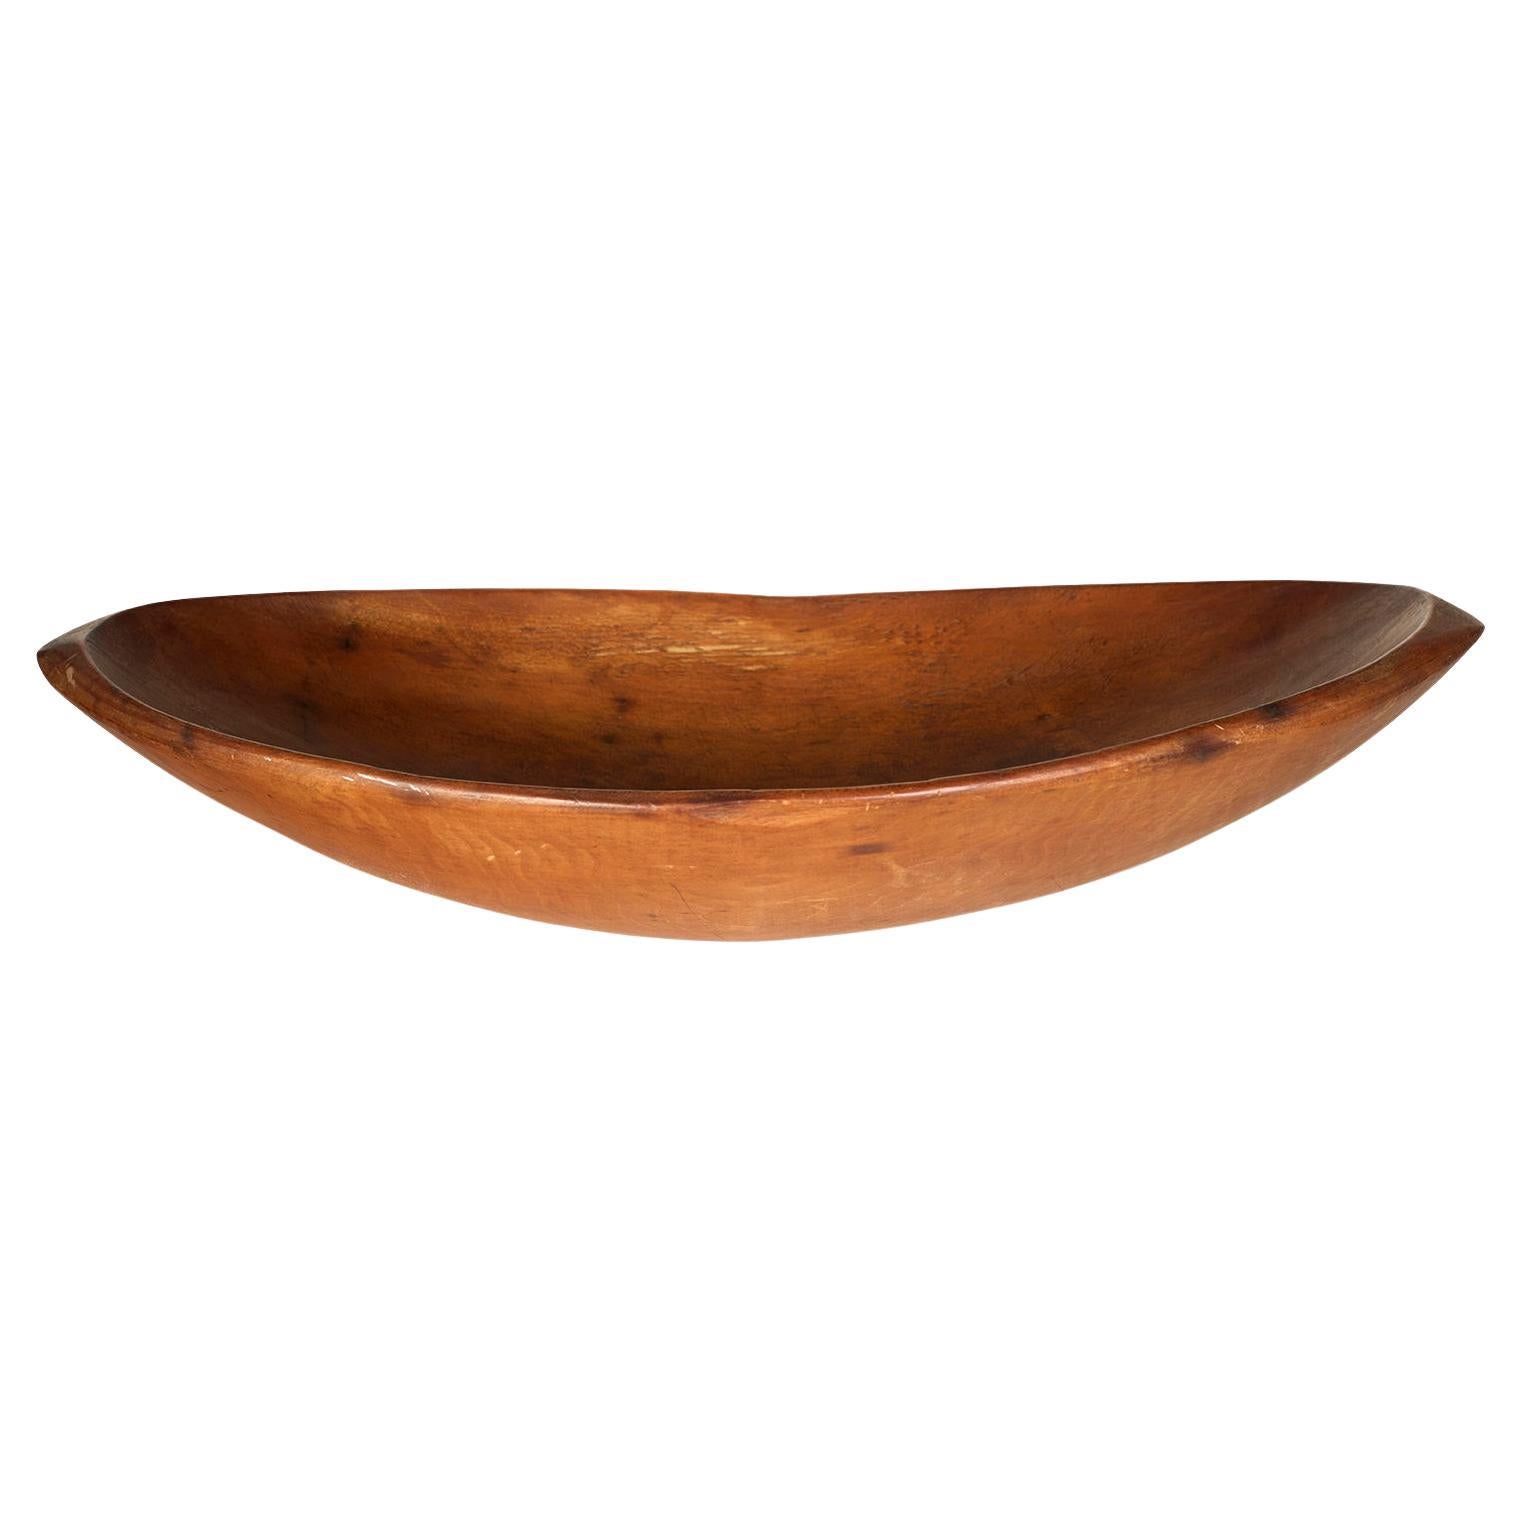 Early Oval Hand Carved Wood Bowl